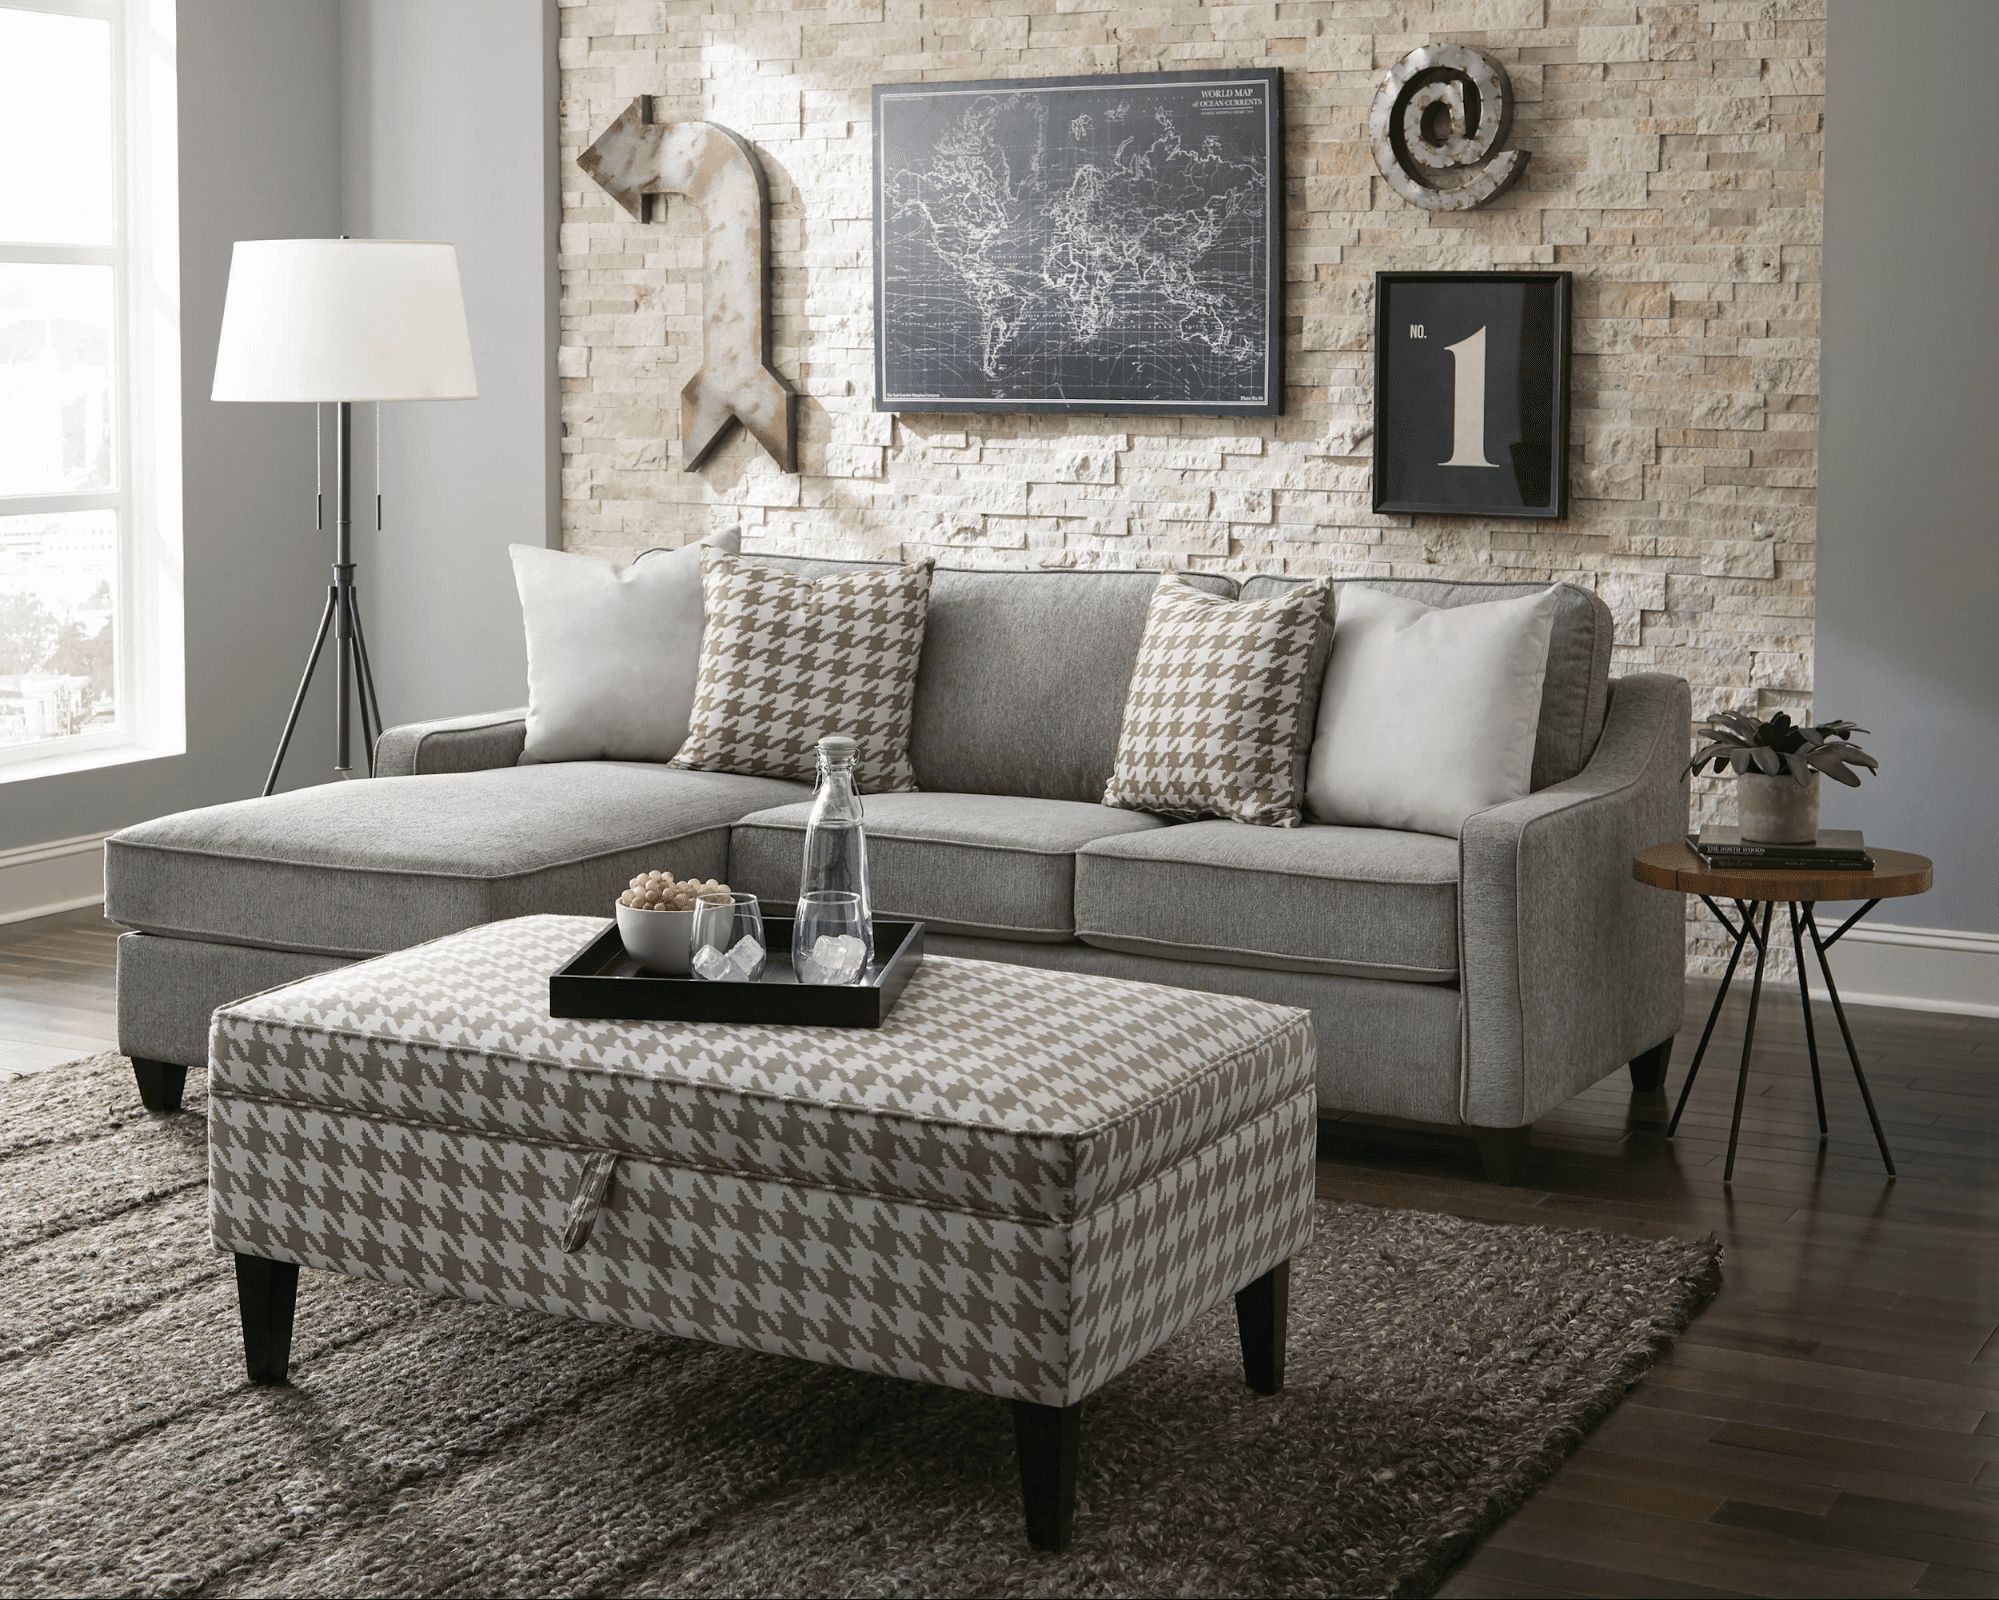 How To Pick A Small Sectional Sofa For A Small Space – Coast Inside Sectional Sofas With Ottomans And Tufted Back Cushion (Gallery 18 of 20)